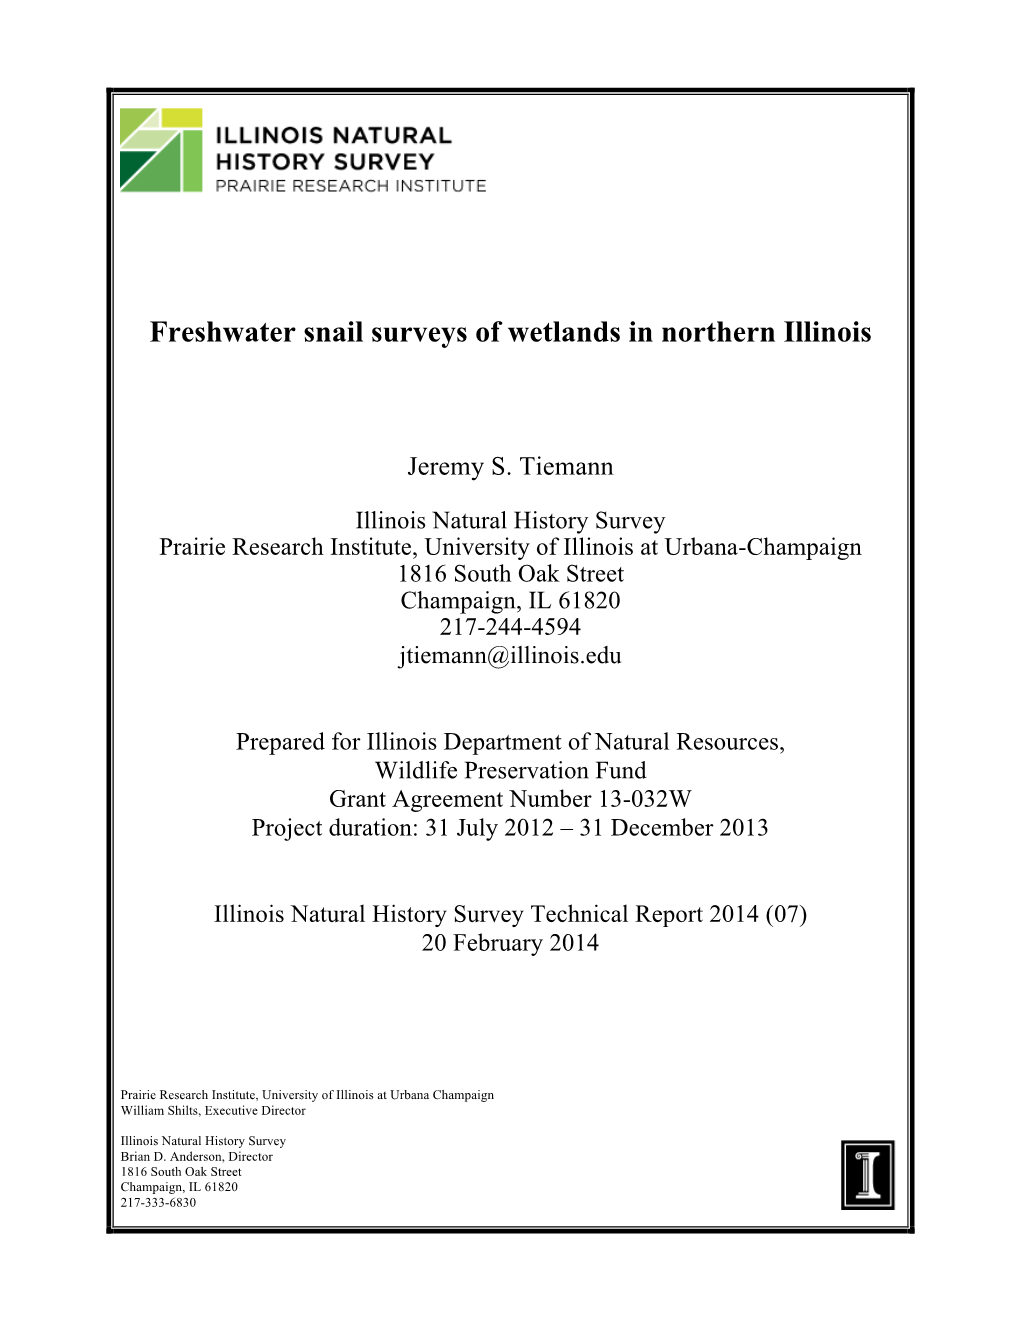 Freshwater Snail Surveys of Wetlands in Northern Illinois